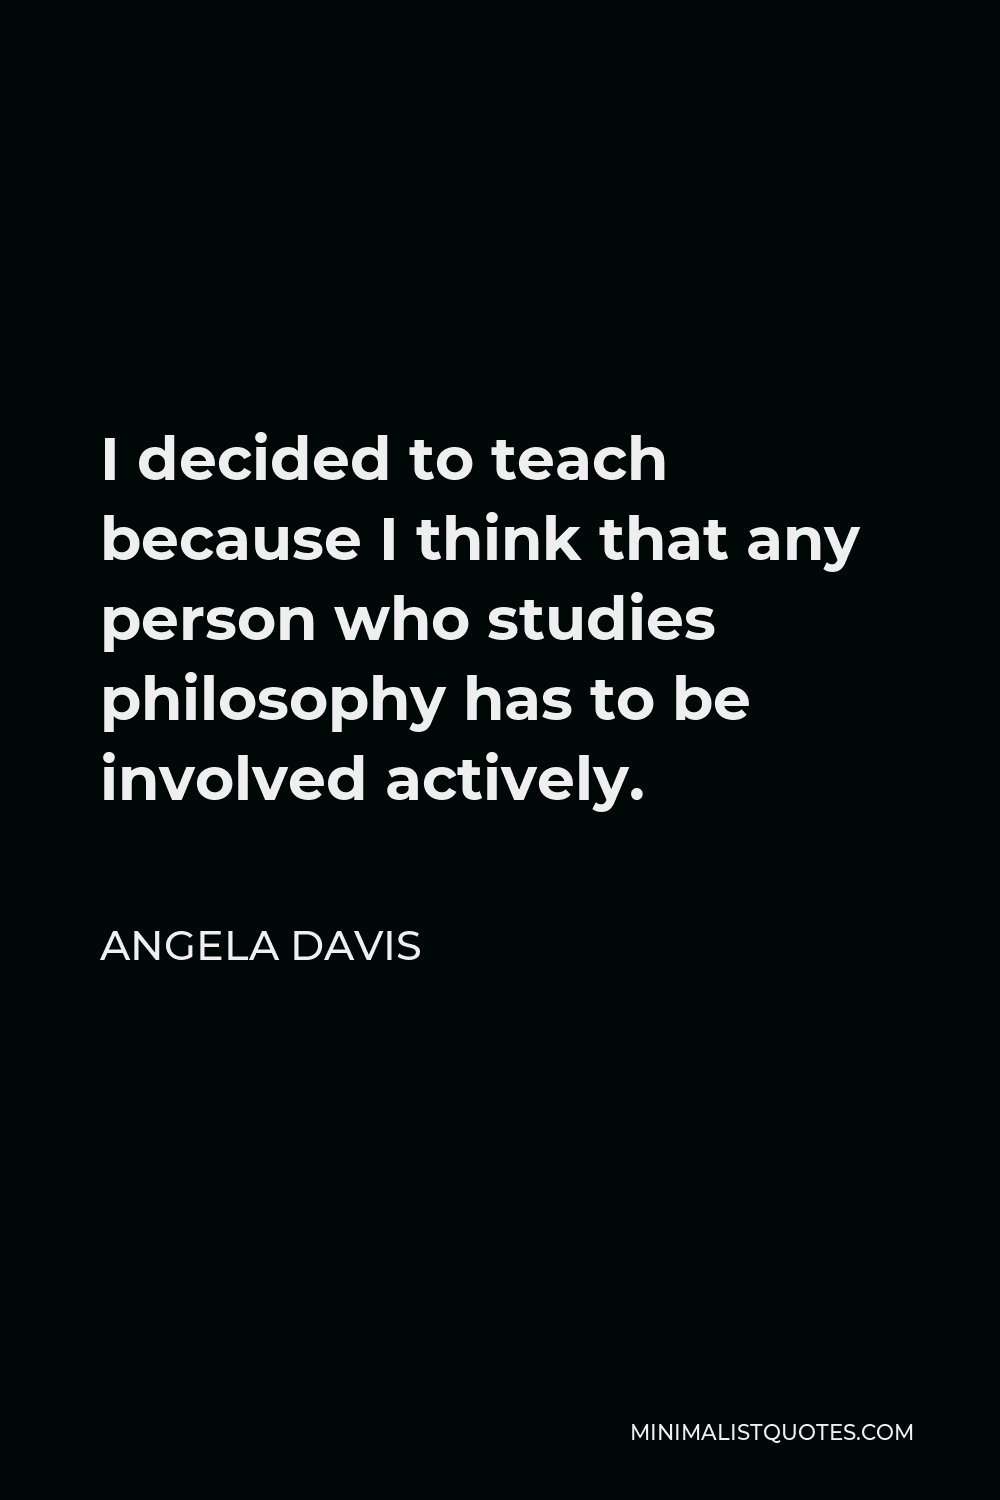 Angela Davis Quote - I decided to teach because I think that any person who studies philosophy has to be involved actively.